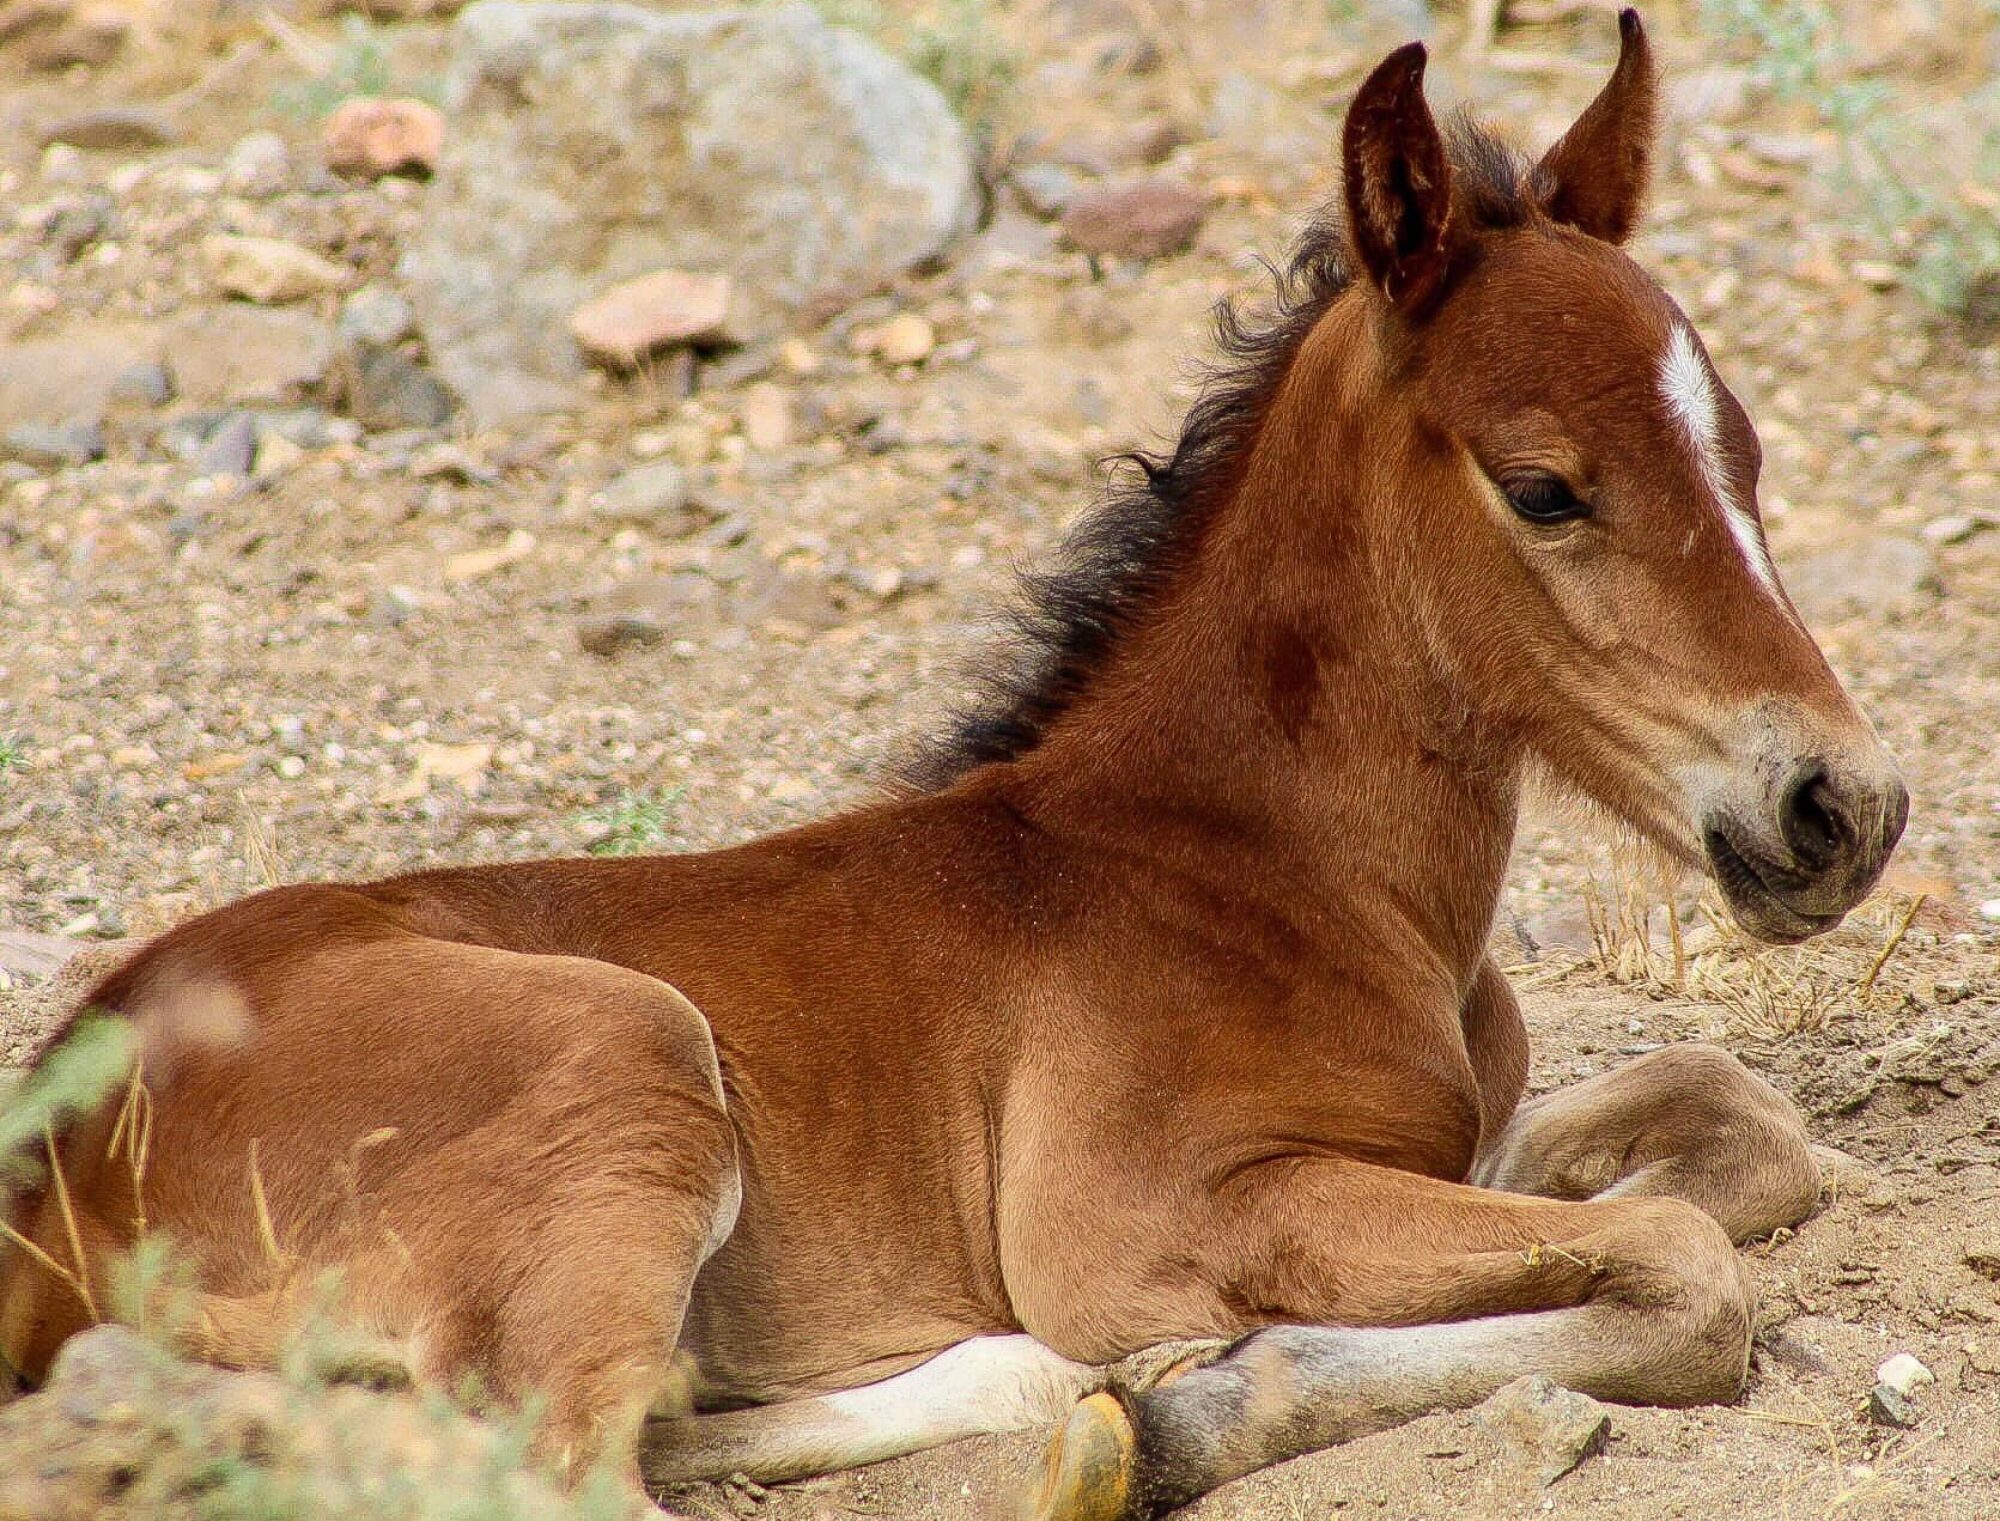 Wild Horse Rescue baby foal